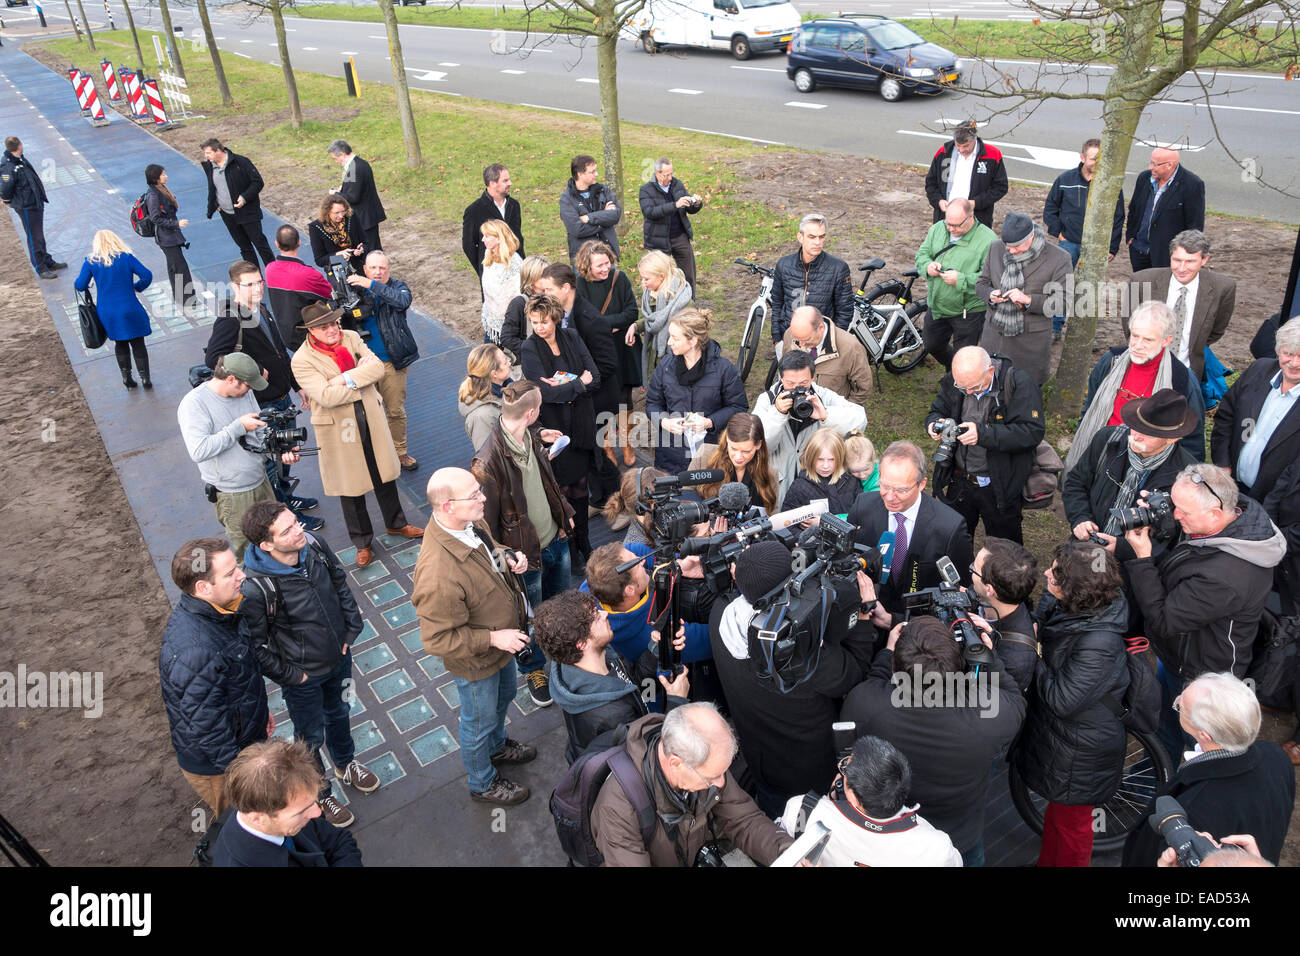 Krommenie, Netherlands. 12th November, 2014. Dutch Minister of Economic Affairs Henk Kamp has just opened the world's first bicycle lane made from solar cells in Krommenie, 25 kilometers north of Amsterdam. On a bike. Normally the opening of a cycle track is strictly a local affair in the Netherlands. This one is special: only 70 meters (230ft) long, it's the world's first bicycle lane made from solar cells. Now local and foreign press  (German, Russian, Chinese among them) all want his comment. Credit:  Wiskerke/Alamy Live News Stock Photo